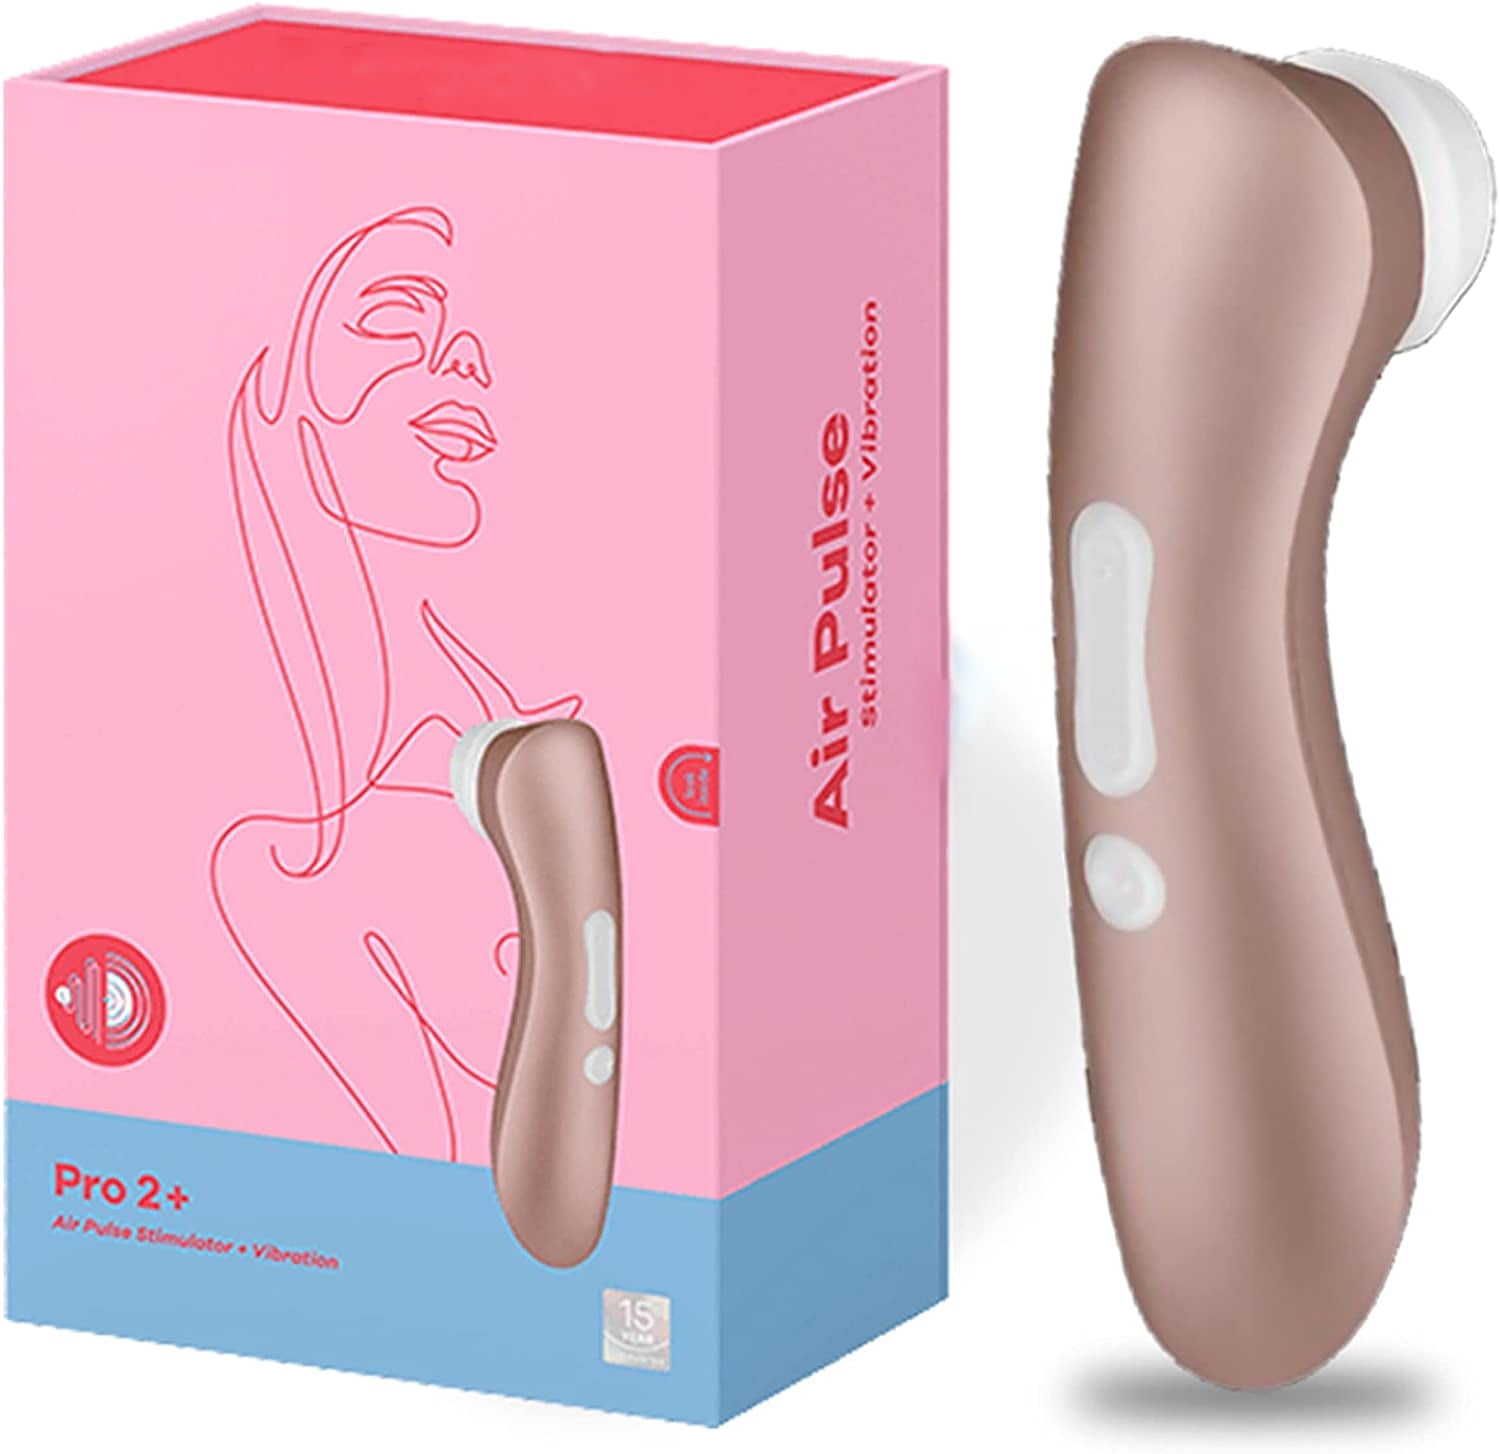 Vibrators for Women, Clitoral Sucking Adult Sex Toys for Woman, 11 Oral Sucking Modes G Spot Clitoral Stimulator Newly Upgraded Sexual Pleasure Tools image pic